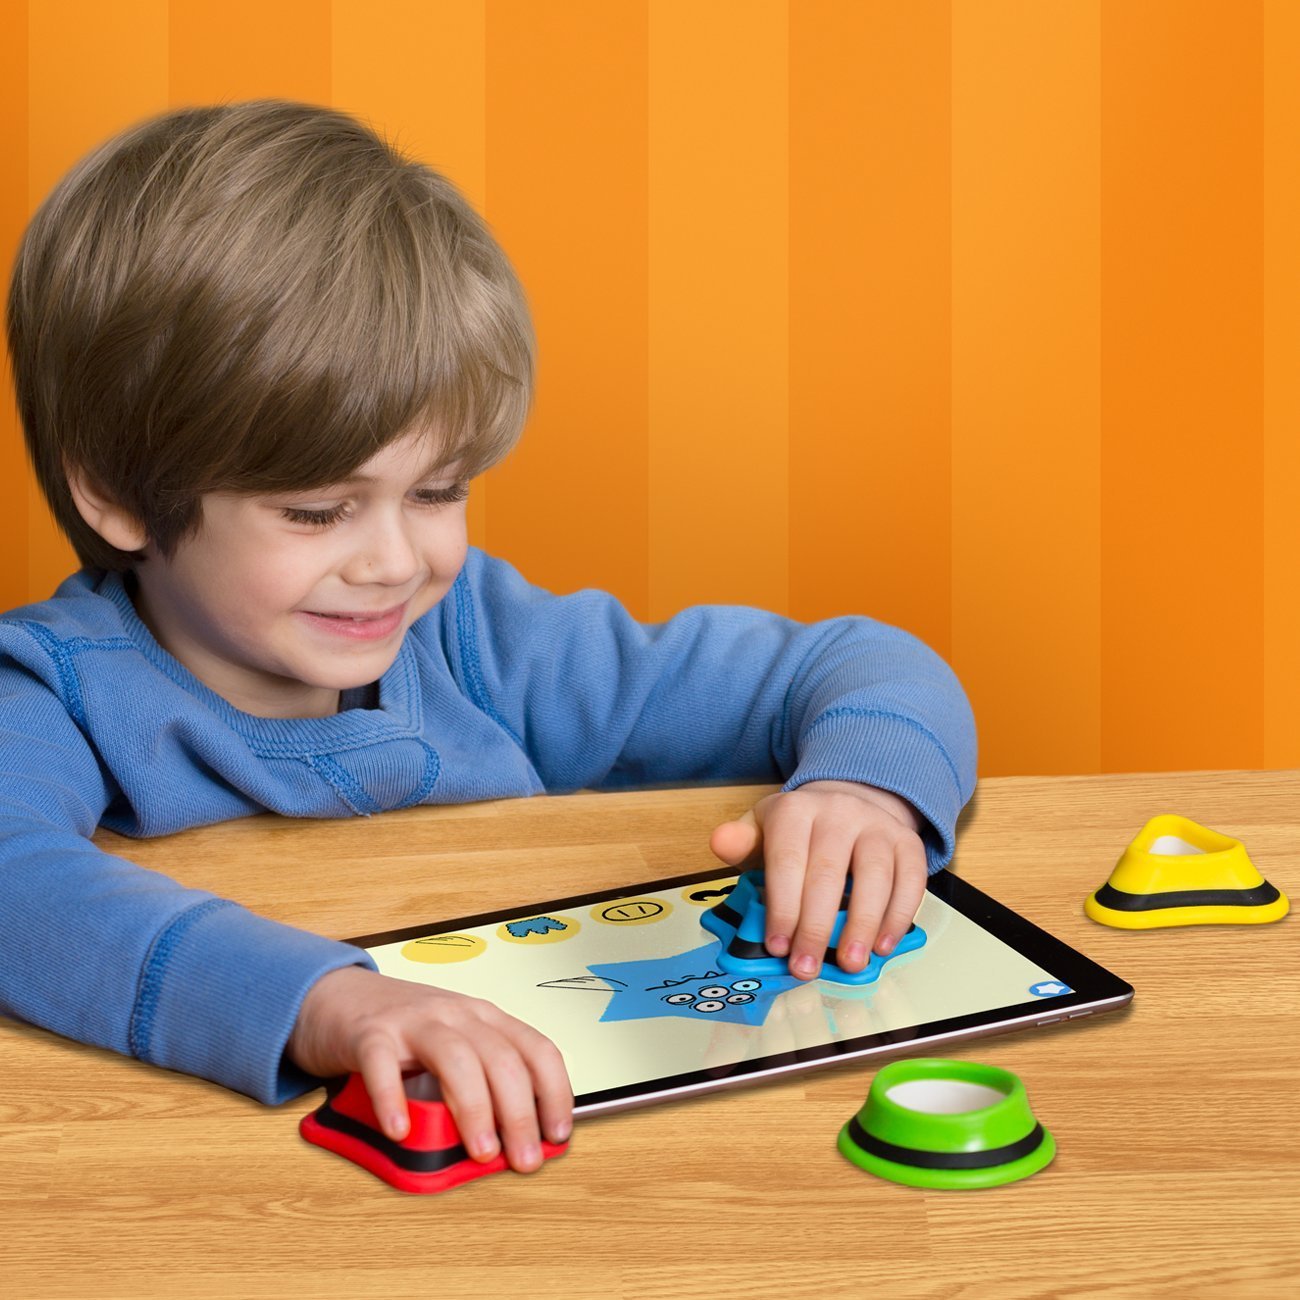 Boy playing with Kidtellect Tiggly Shapes.jpg